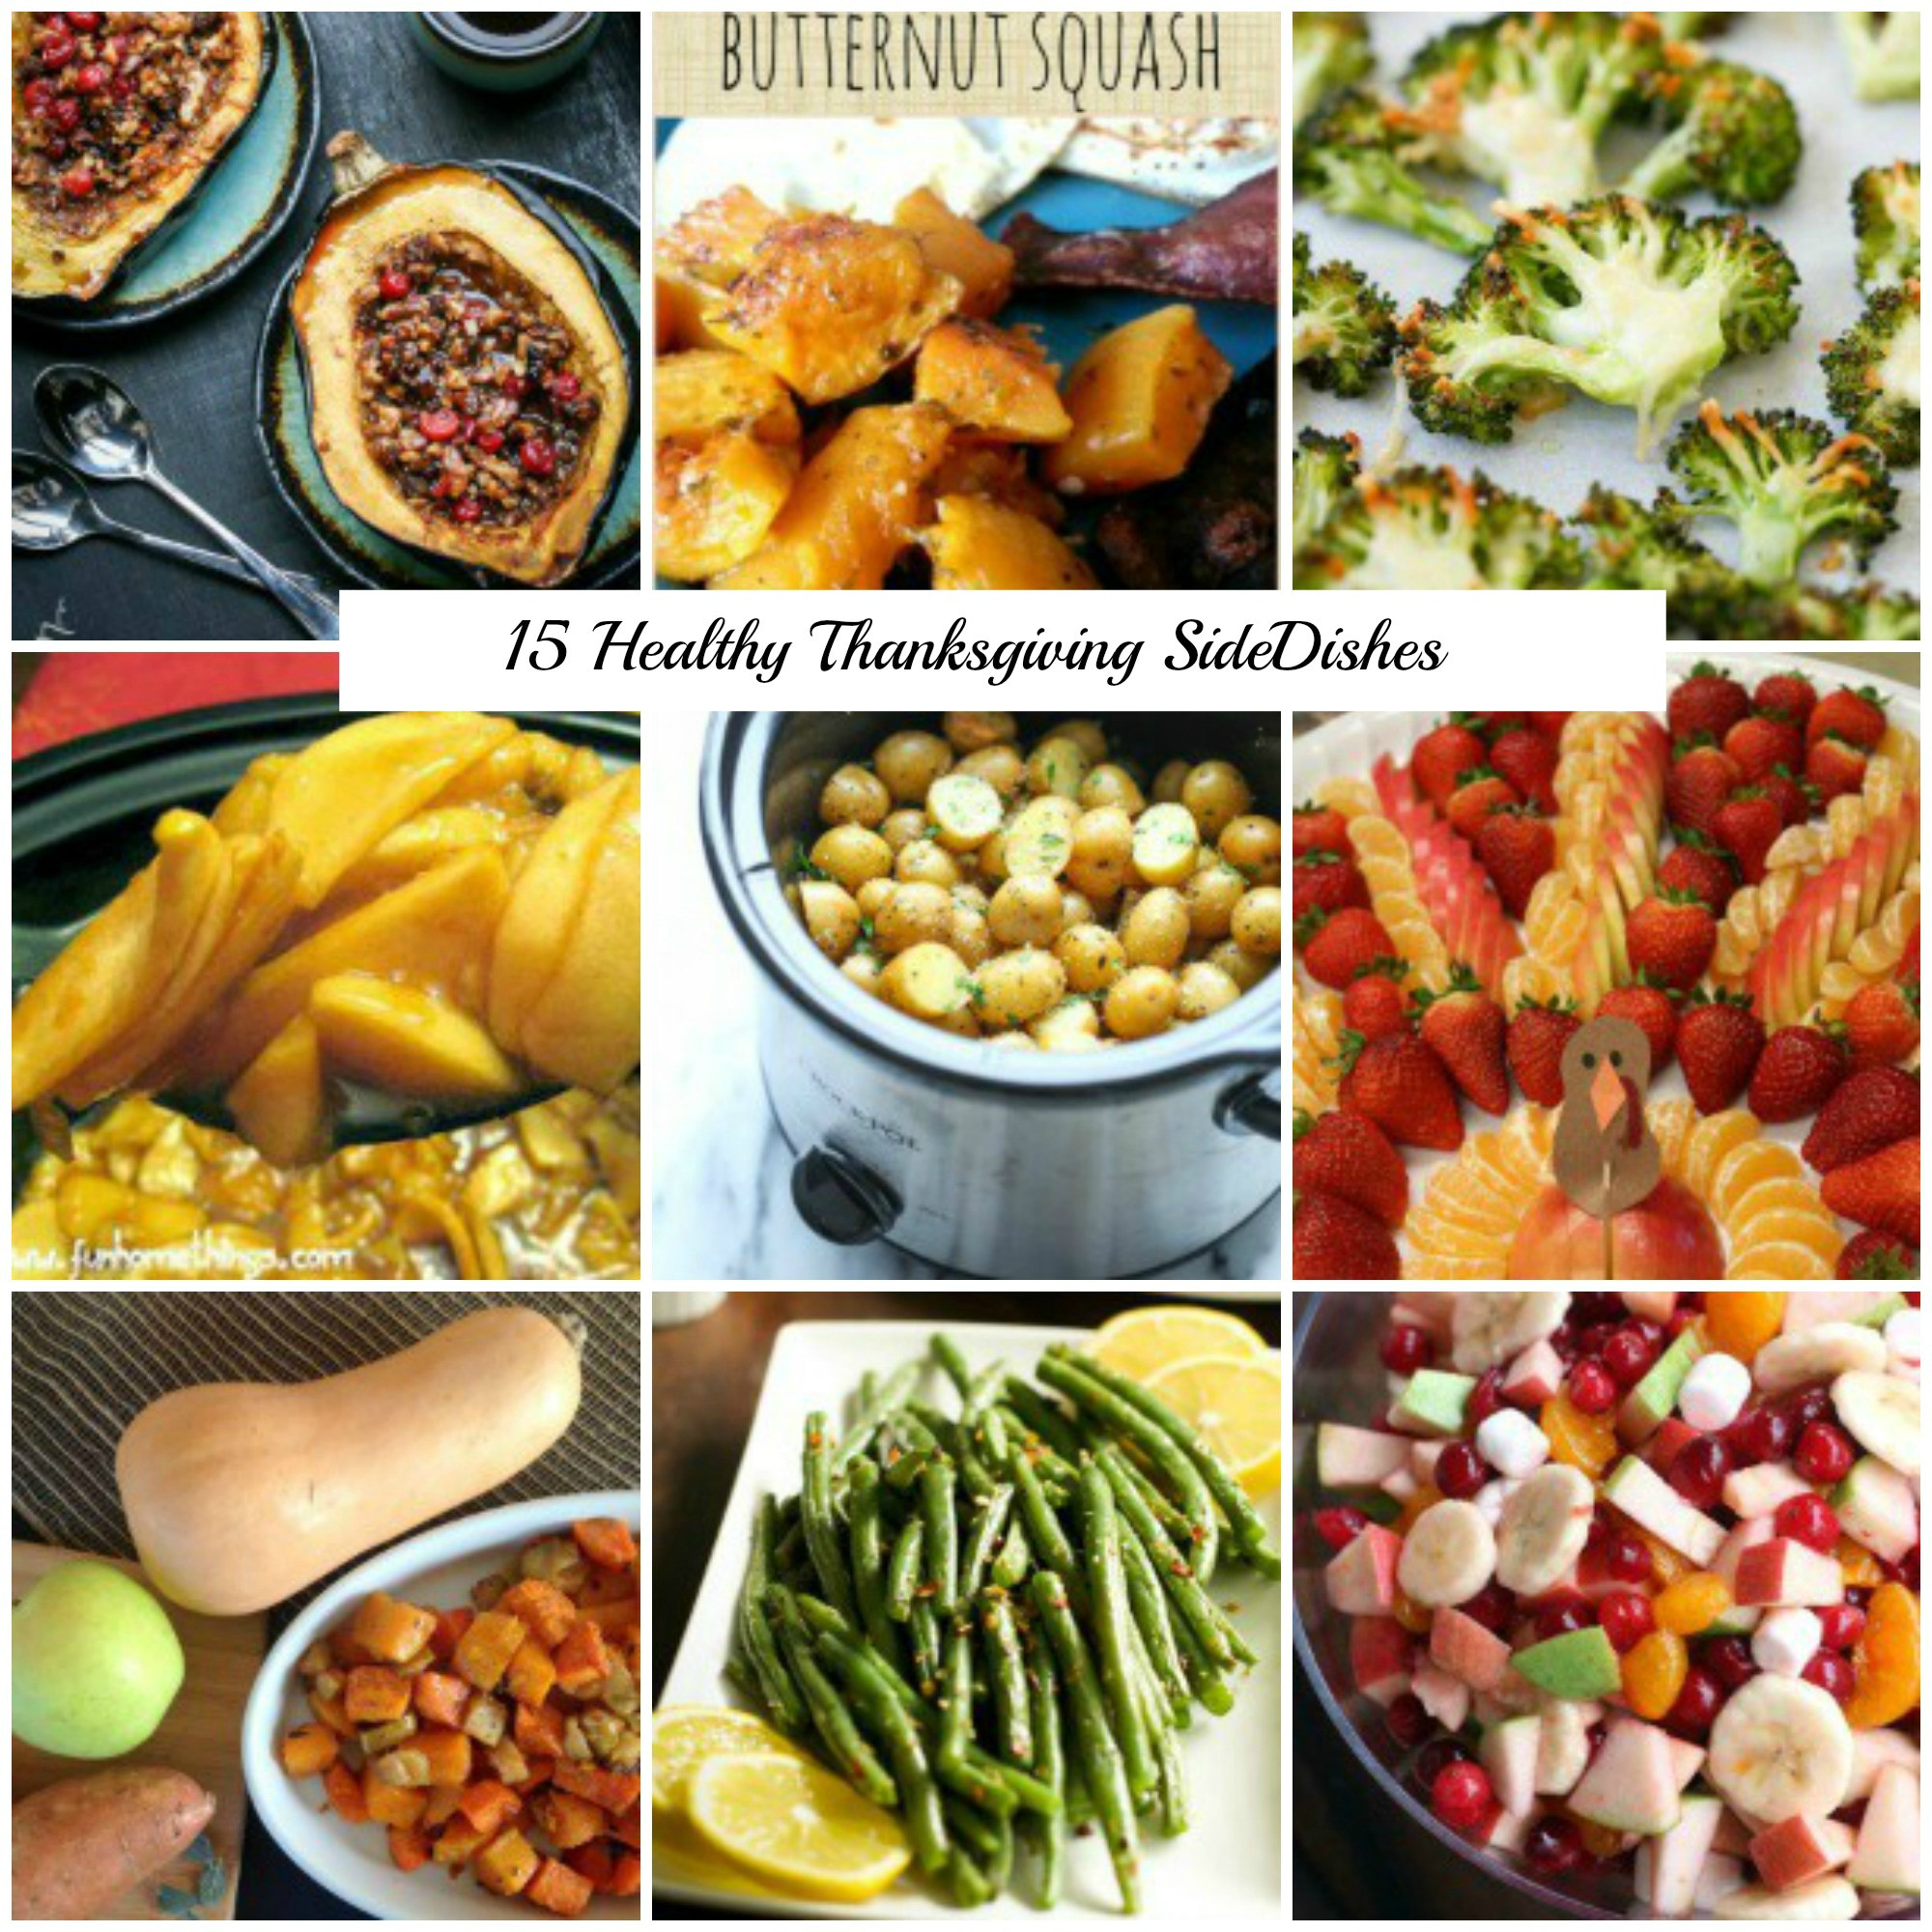 Healthy Thanksgiving Side Dish Recipes
 15 Healthy Thanksgiving Side Dish Recipes That are Still